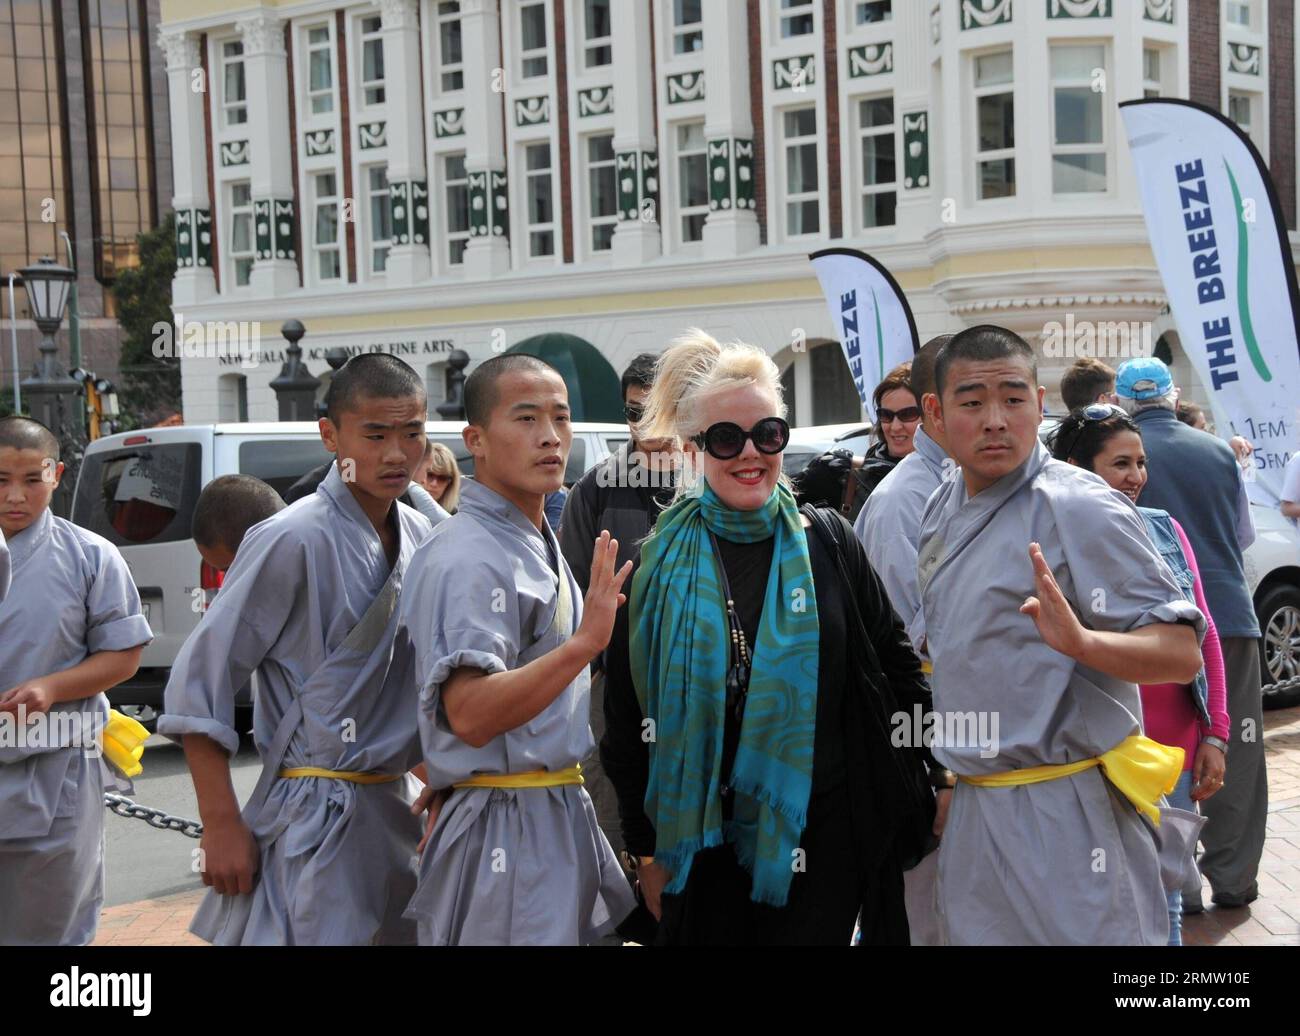 (140926) -- WELLINGTON, Sept. 26, 2014 -- Chinese Kungfu monks pose for photos with local people in Wellington, New Zealand, Spet. 26, 2014. The iconic Shaolin Kungfu Monk Troupe arrived in Wellington to attend the World of Wearable (WOW) Art Awards Shows. ) NEW ZEALAND-WELLINGTON-CHINA-KUNGFU MONK SuxLiang PUBLICATIONxNOTxINxCHN   Wellington Sept 26 2014 Chinese Kungfu Monks Pose for Photos With Local Celebrities in Wellington New Zealand  26 2014 The  Shaolin Kungfu Monk Troupe arrived in Wellington to attend The World of Wearable Wow Art Awards Shows New Zealand Wellington China Kungfu Monk Stock Photo